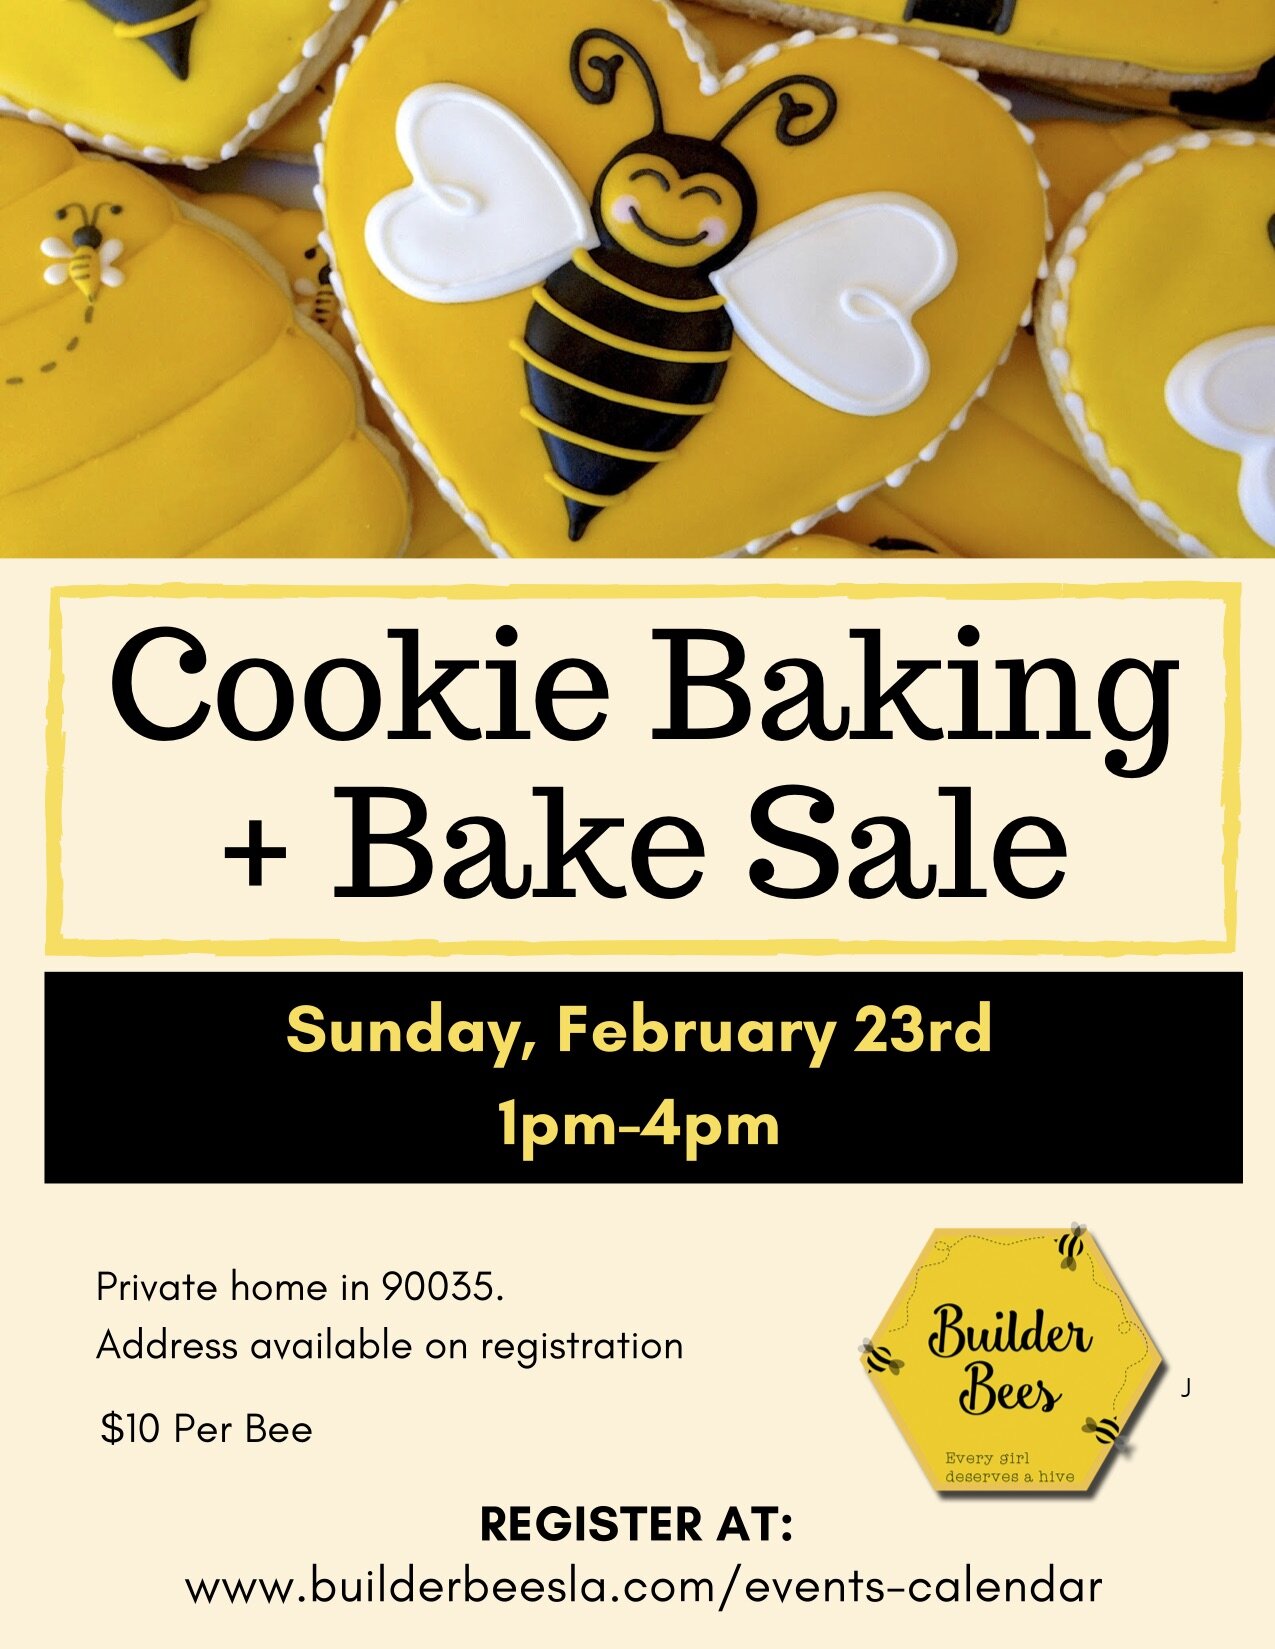 Builder Bees Cookie Baking and Bake Sale